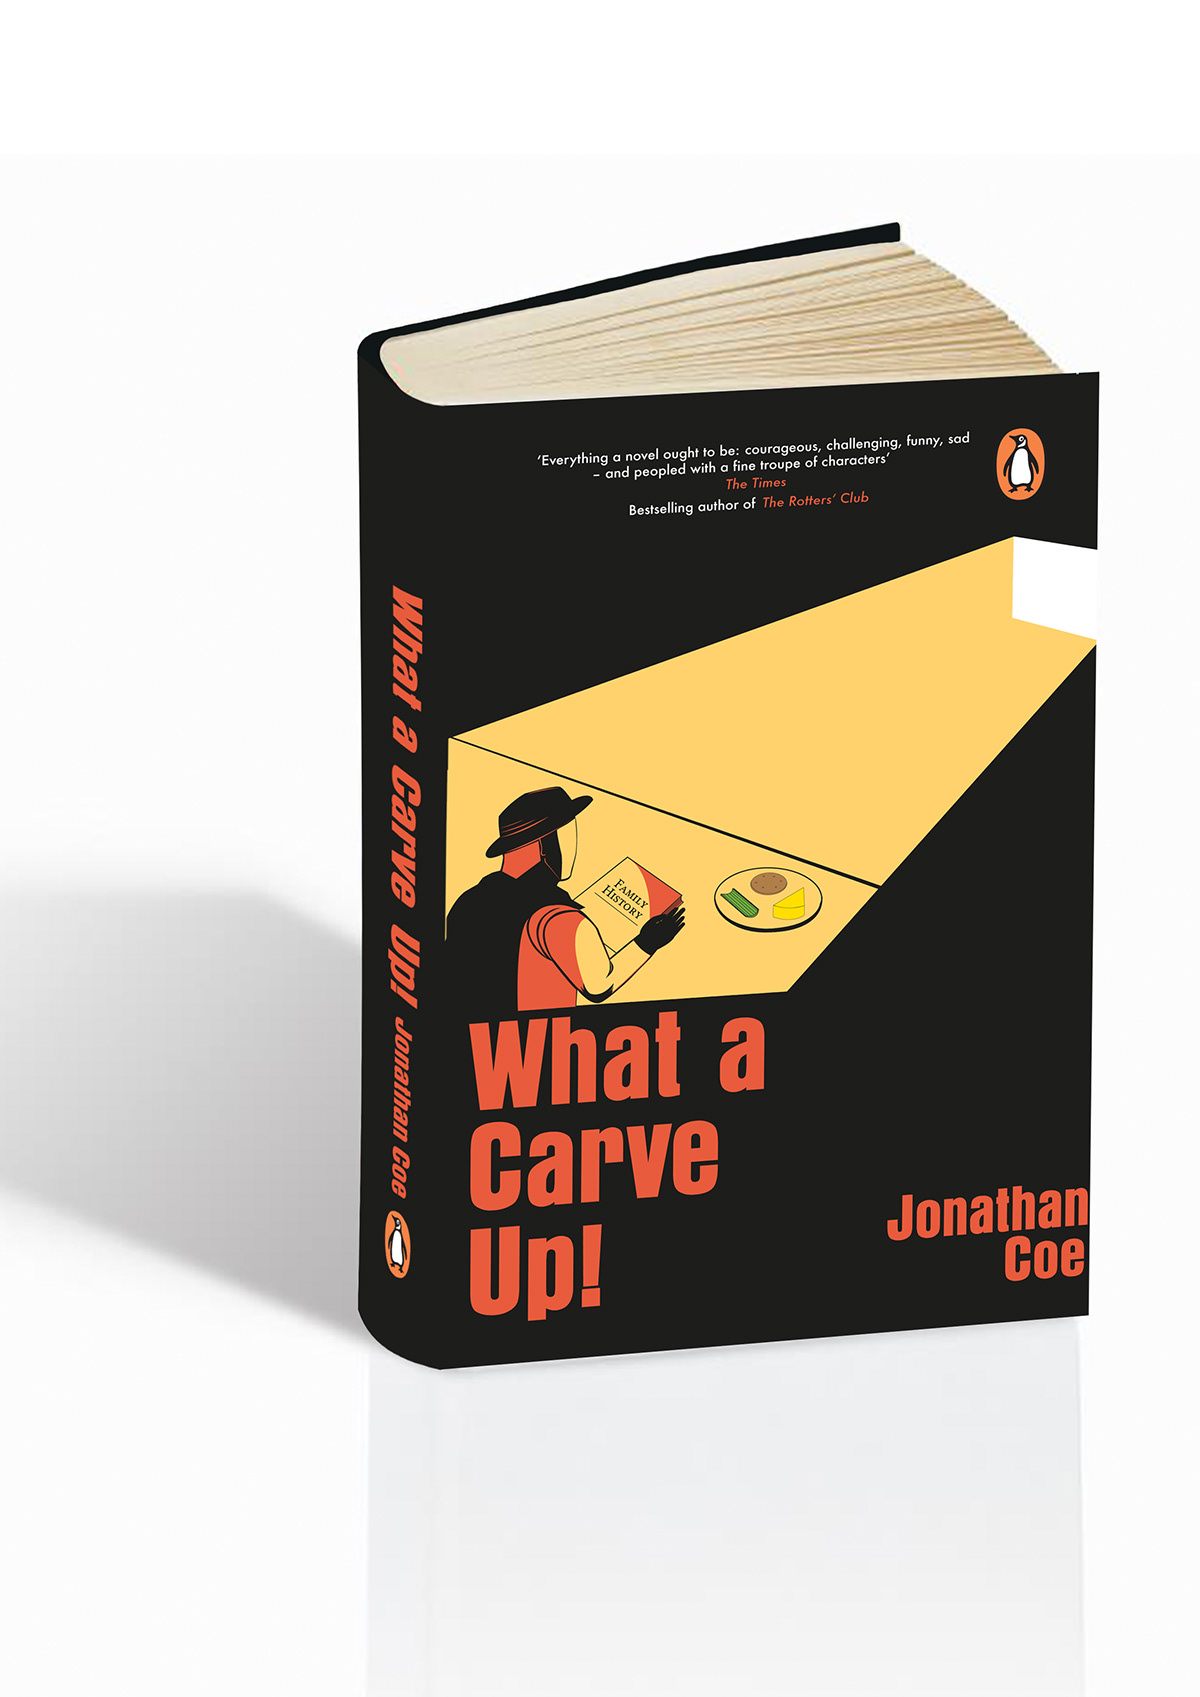 book design penguin book cover Competition WhatACarveUp! JonathanCoe